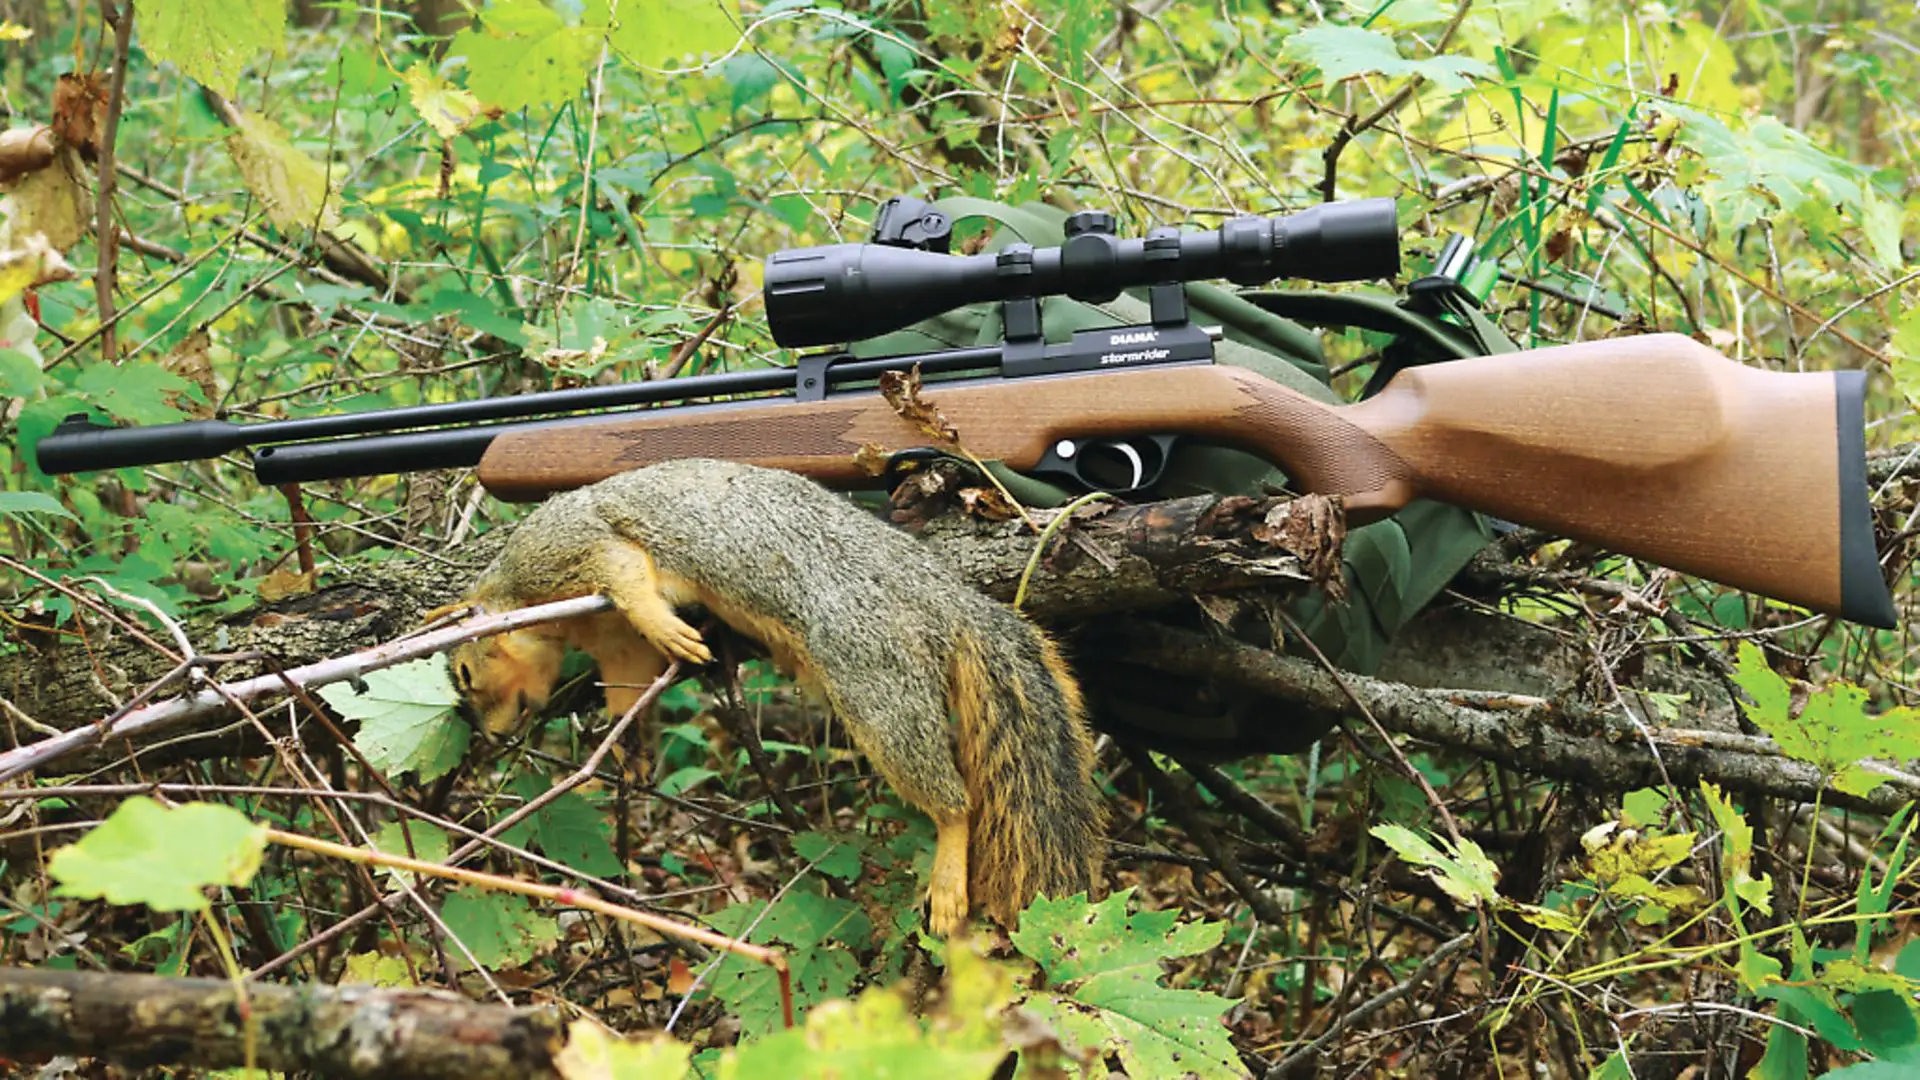 s11 Best PCP air rifles - 11 of the best PCP guns you can buy right now (Reviews and Buying Guide 2023)